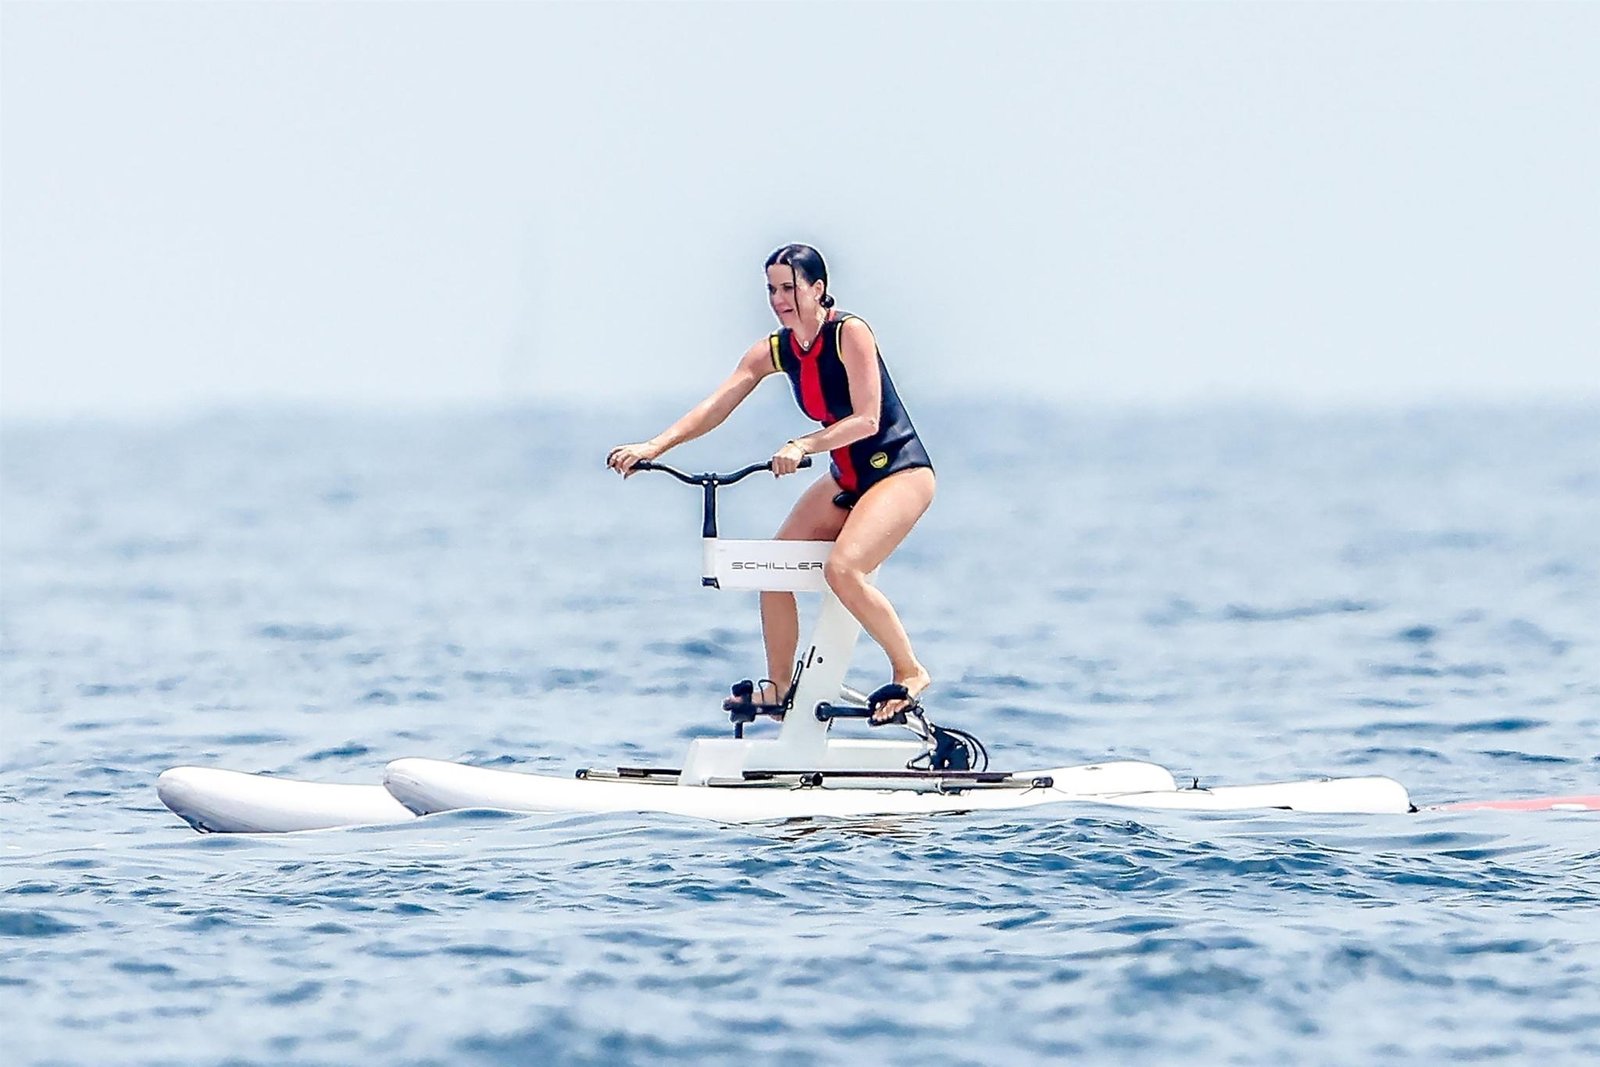 Katy Perry on a water bike